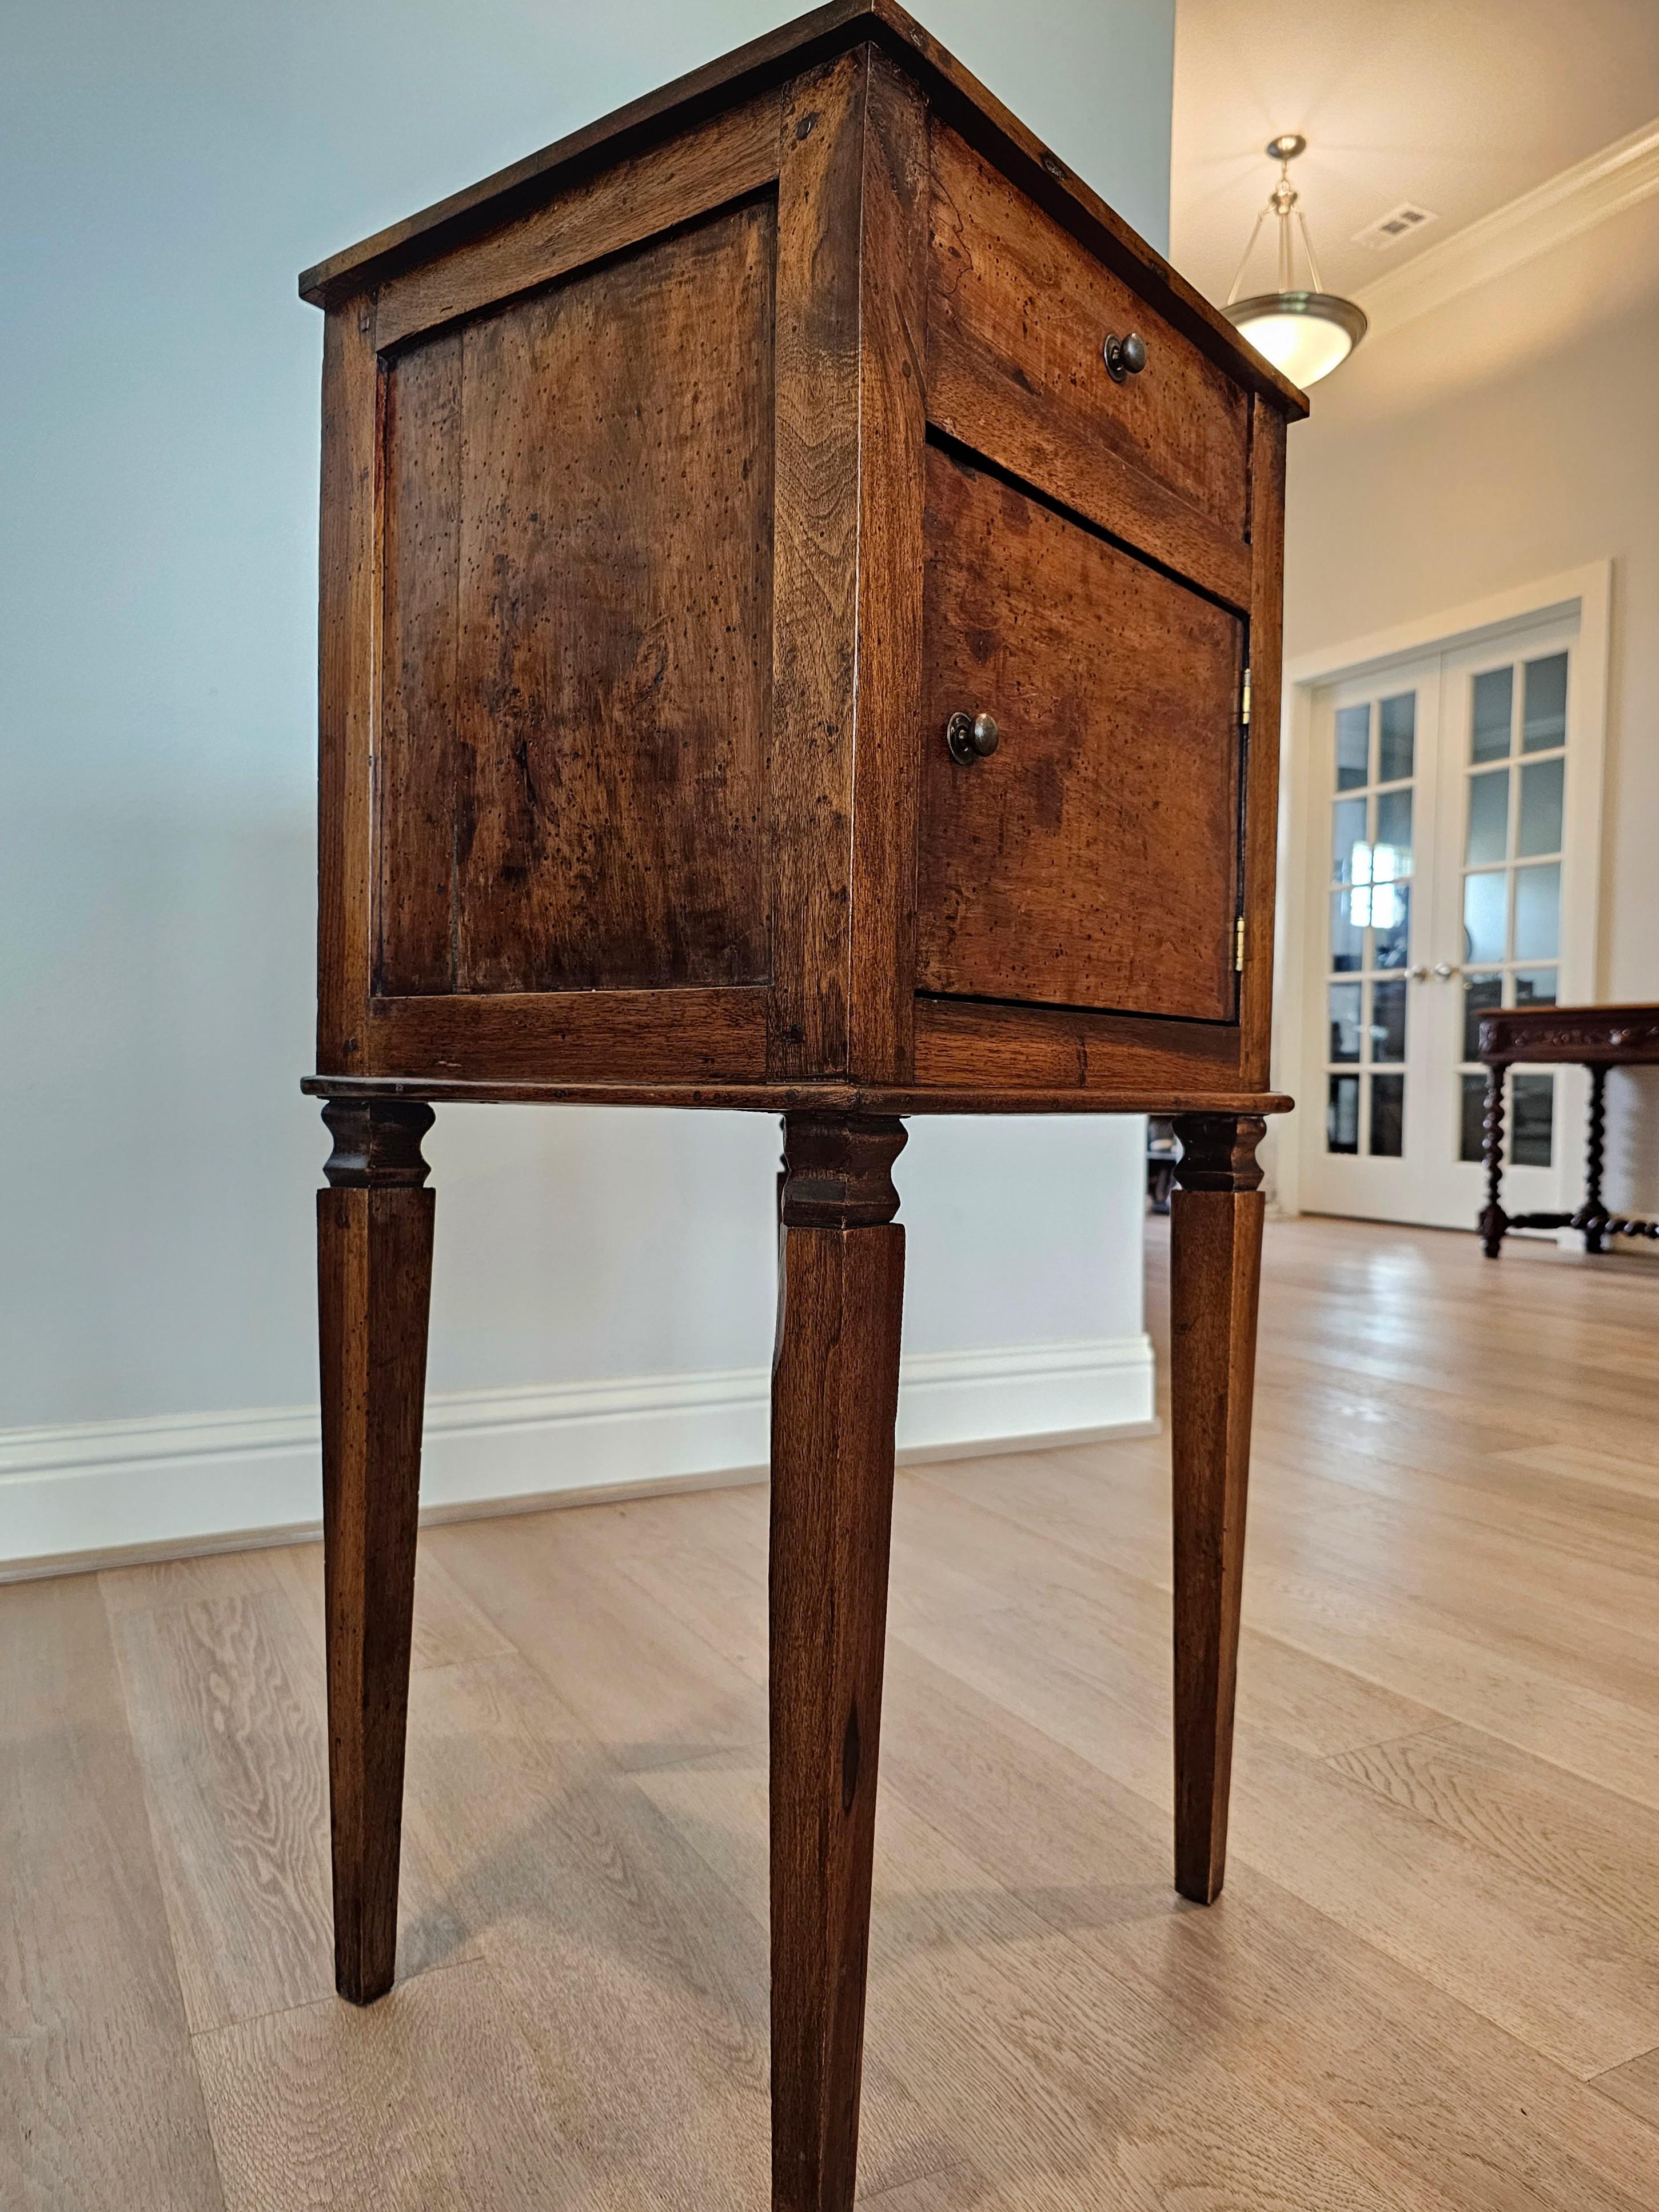 A rustic antique Italian country Neoclassical style walnut side cabinet with beautifully aged patina. 

Hand-crafted in Italy in the 19th century, most likely Tuscan region of Central Italy, Neo-classical Louis XVI taste, having single dovetailed